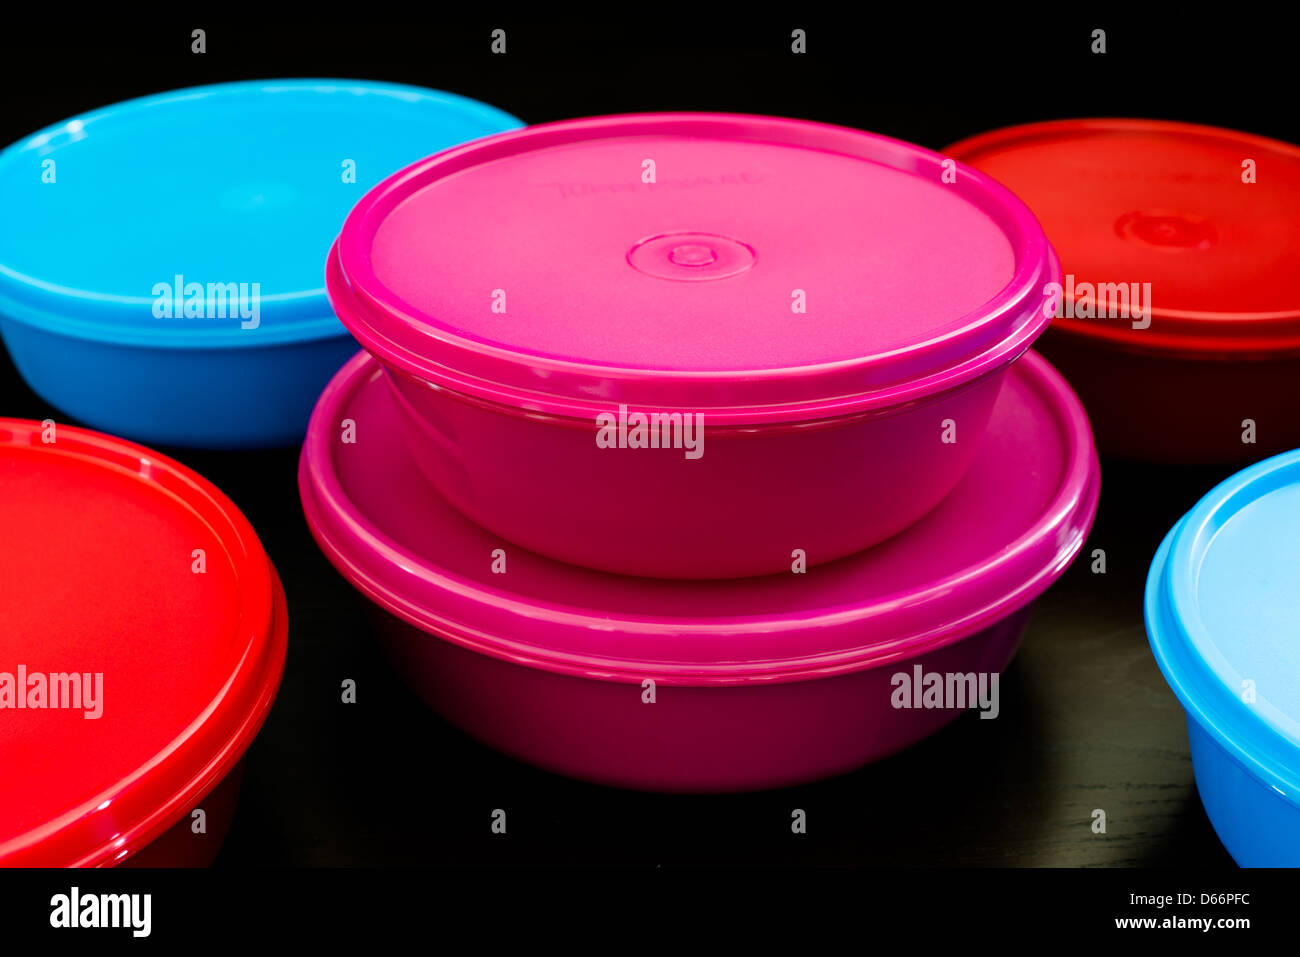 https://c8.alamy.com/comp/D66PFC/an-assortment-of-tupperware-boxes-reusable-plastic-containers-are-D66PFC.jpg